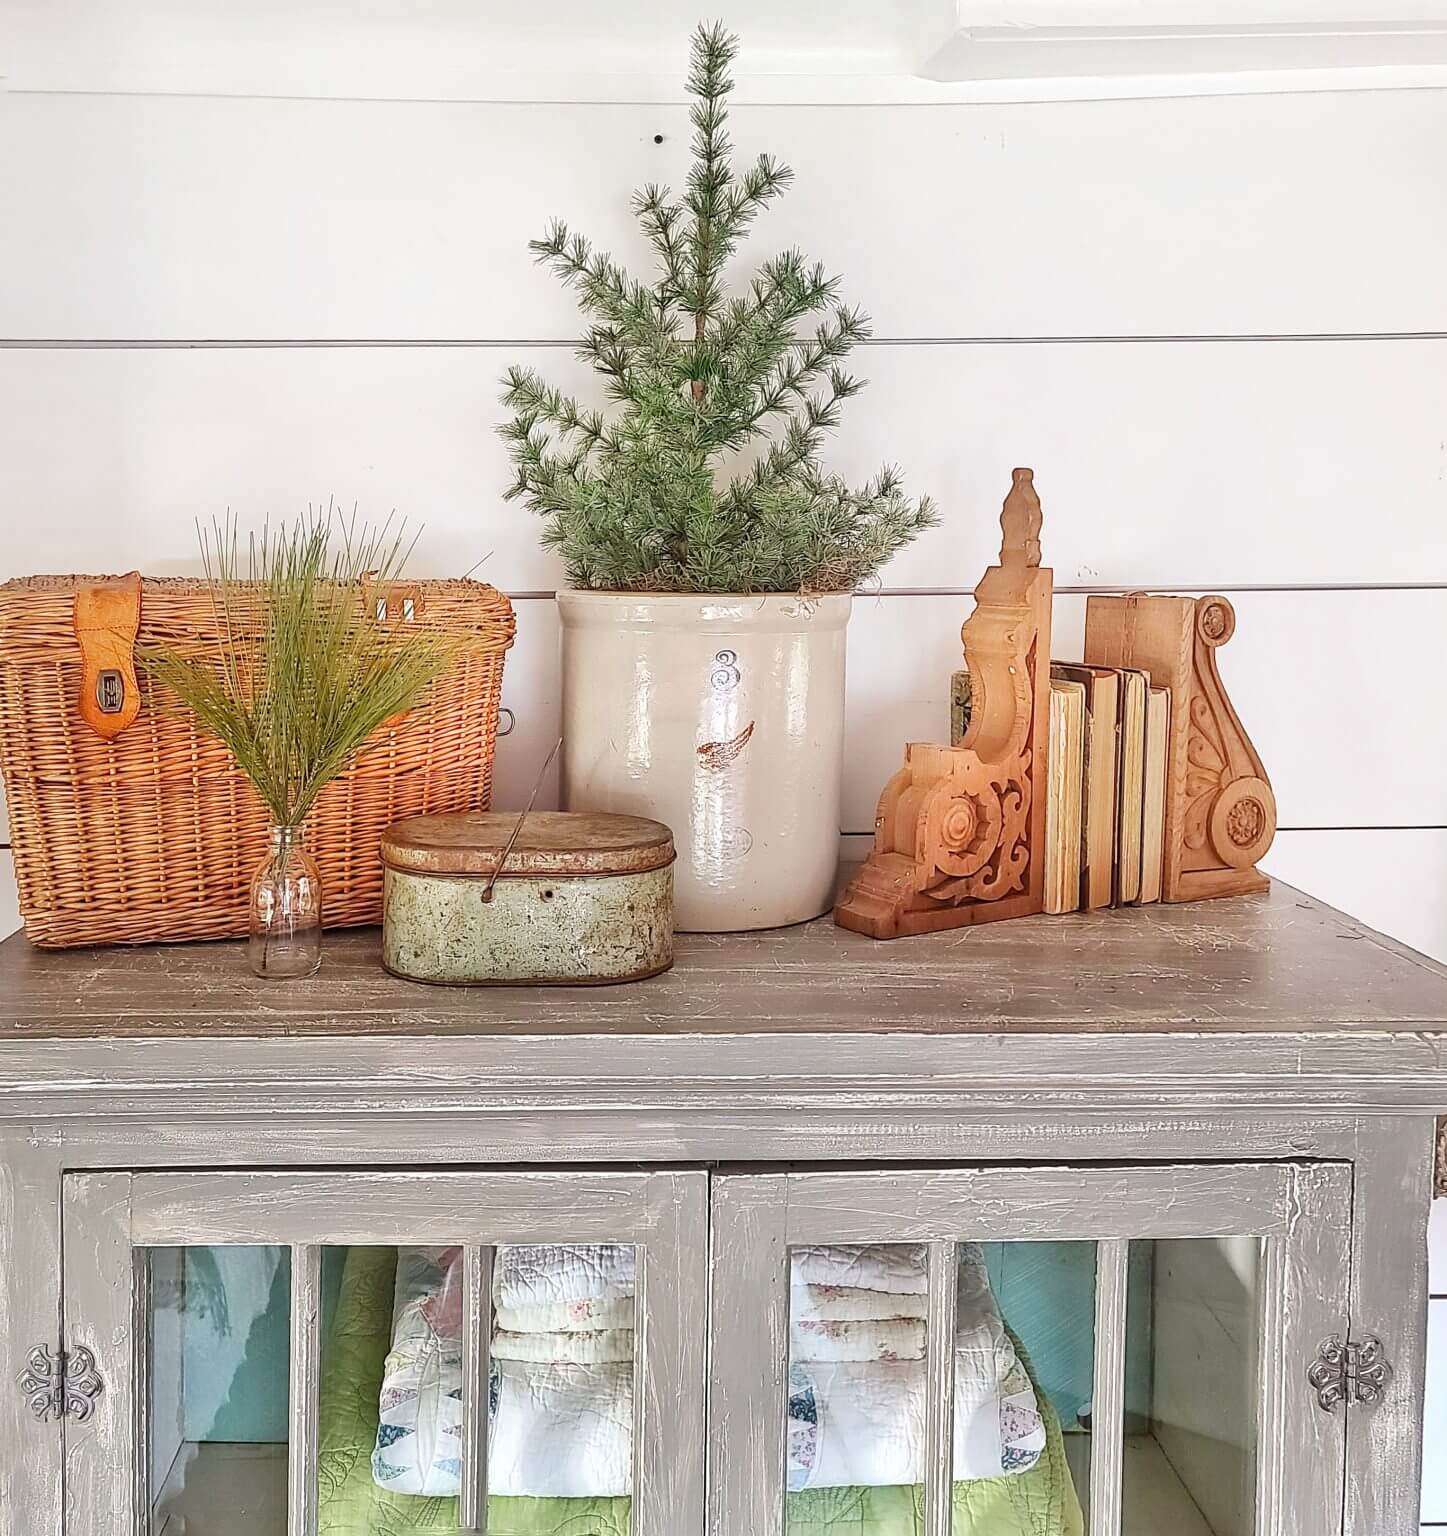 The Love Of Home Files #12: Decorate With Vintage Finds such as old crocks, baskets, tins, corbels and books